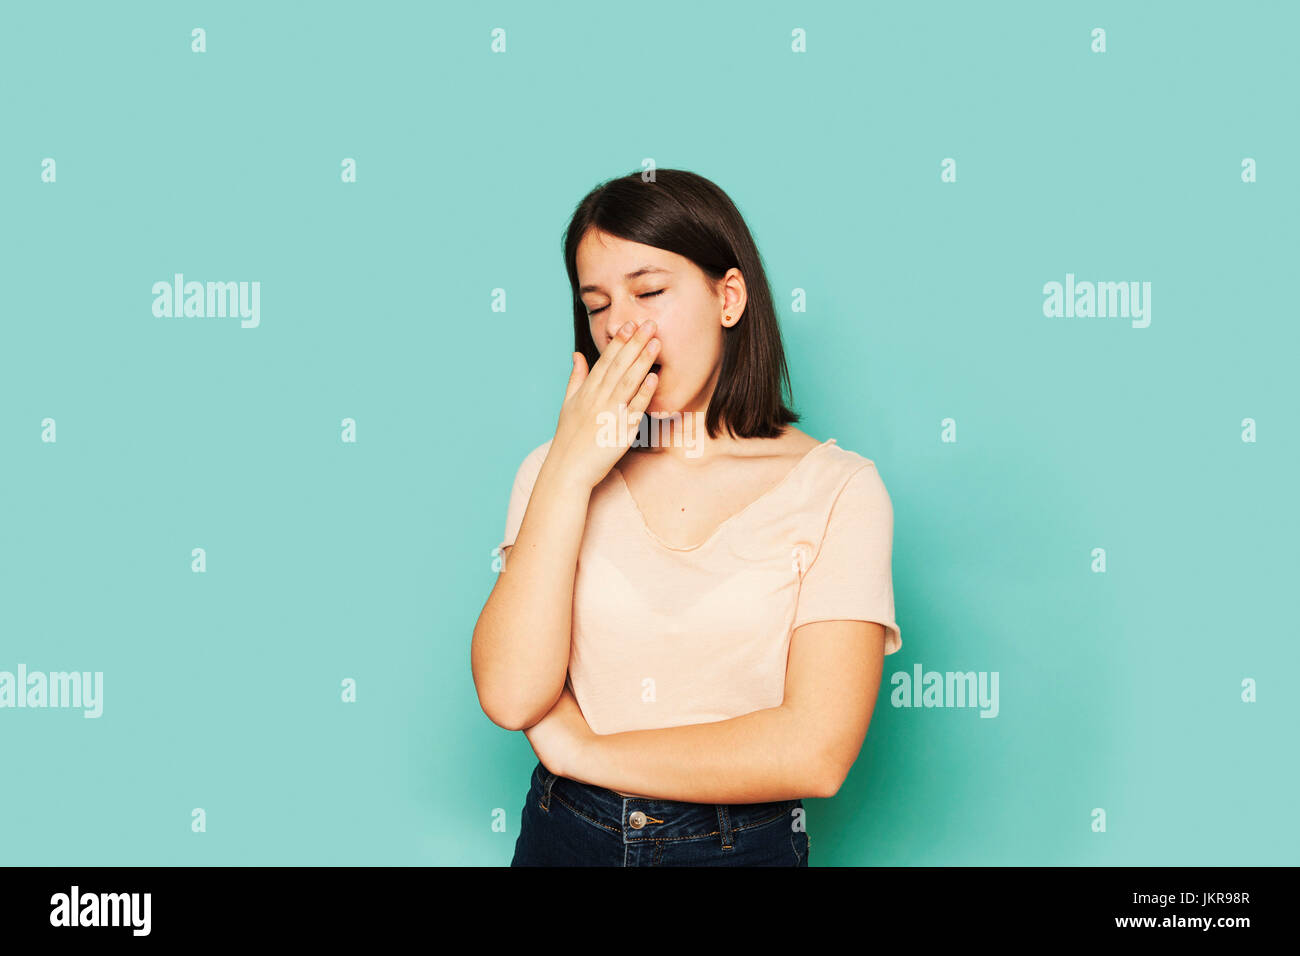 Tired girl yawning while standing on turquoise colored Stock Photo